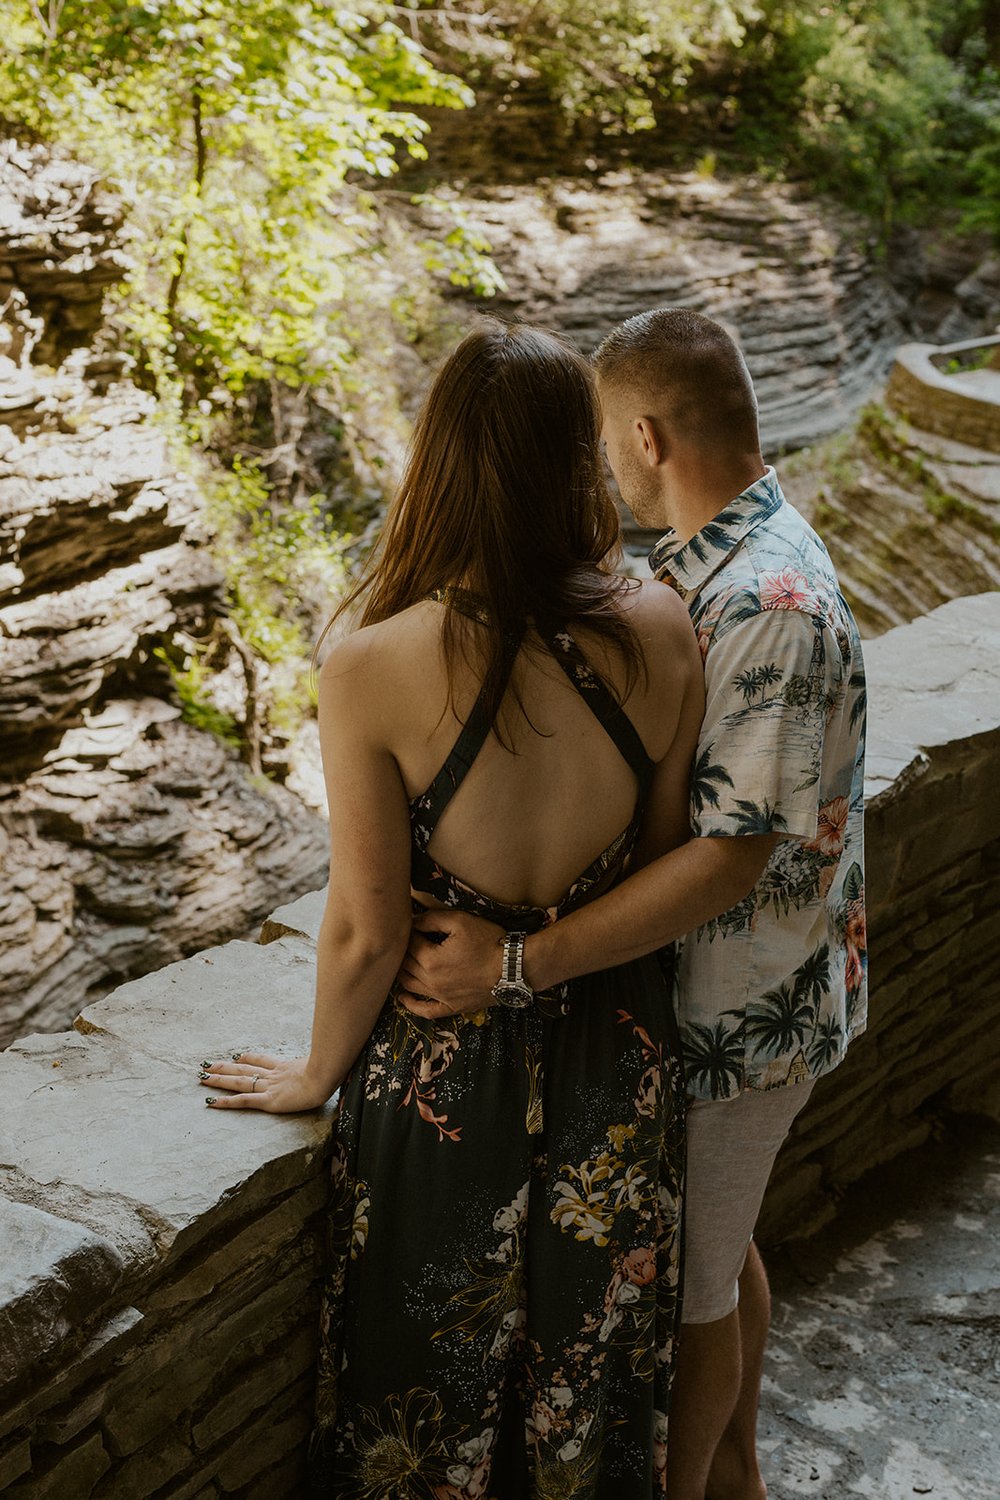 Hade holds his bride as they both look down over the ledge admiring the beauty of Watkins Glen State Park.